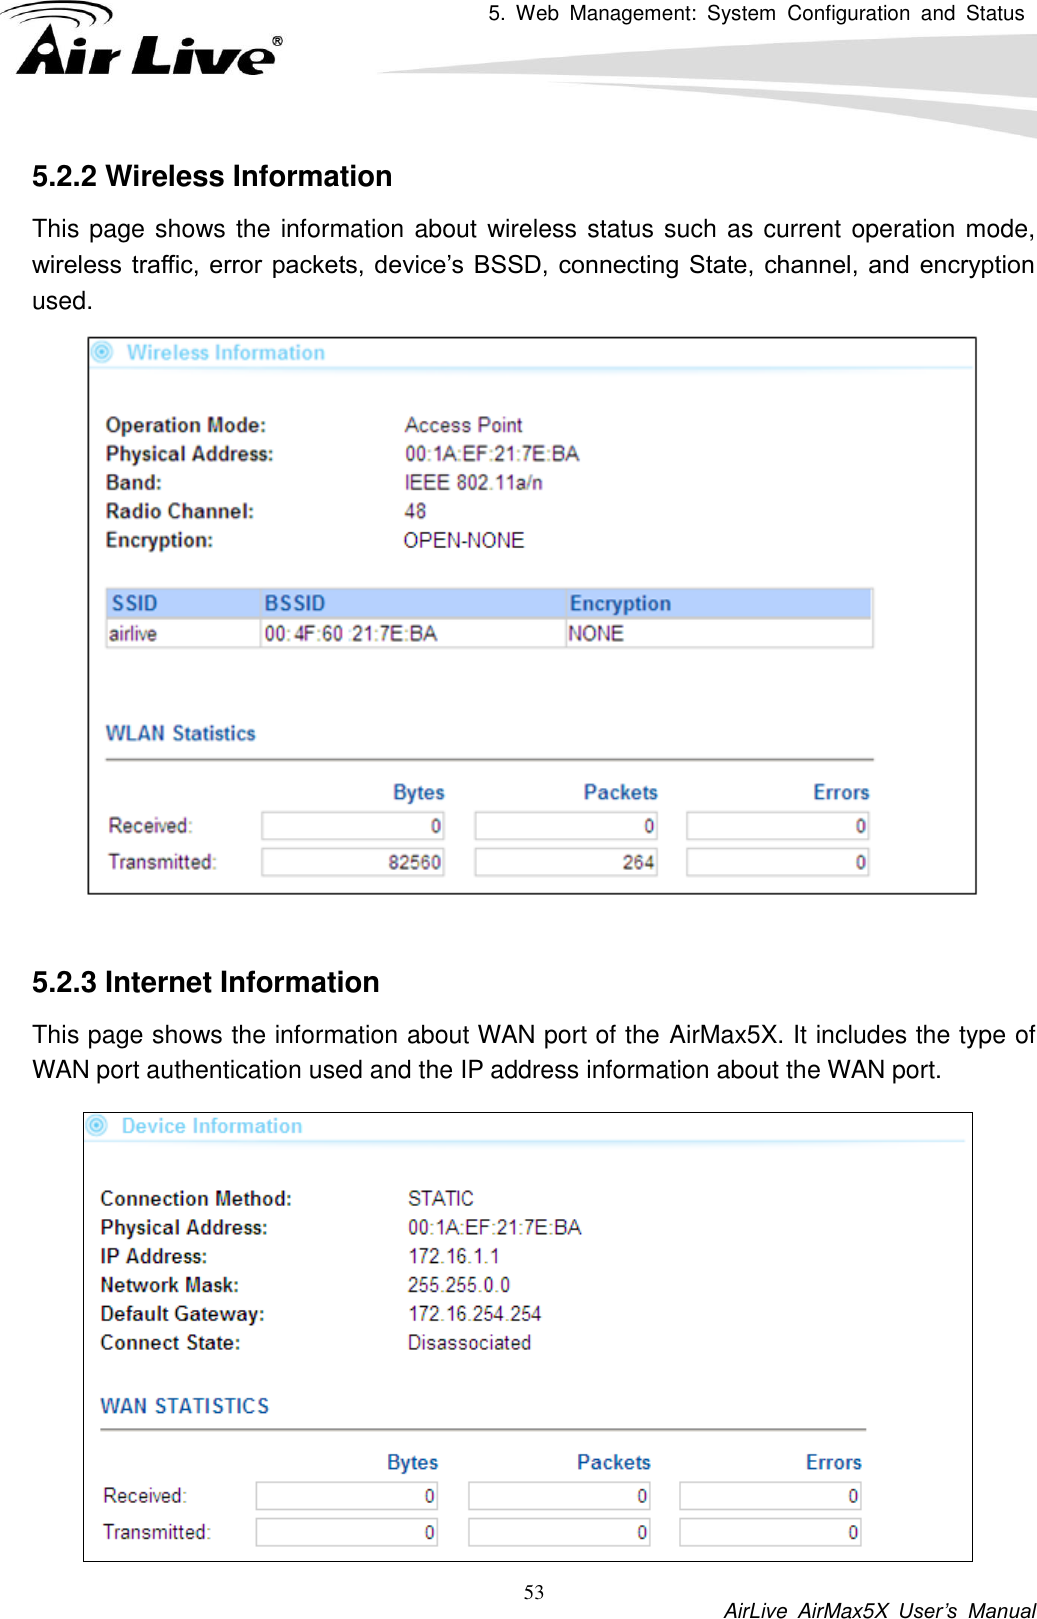 5.  Web  Management:  System  Configuration  and  Status          AirLive  AirMax5X  User’s  Manual 53 5.2.2 Wireless Information This page shows the information about wireless status such as current operation mode, wireless traffic, error packets, device’s BSSD,  connecting State, channel,  and encryption used.     5.2.3 Internet Information This page shows the information about WAN port of the AirMax5X. It includes the type of WAN port authentication used and the IP address information about the WAN port. 